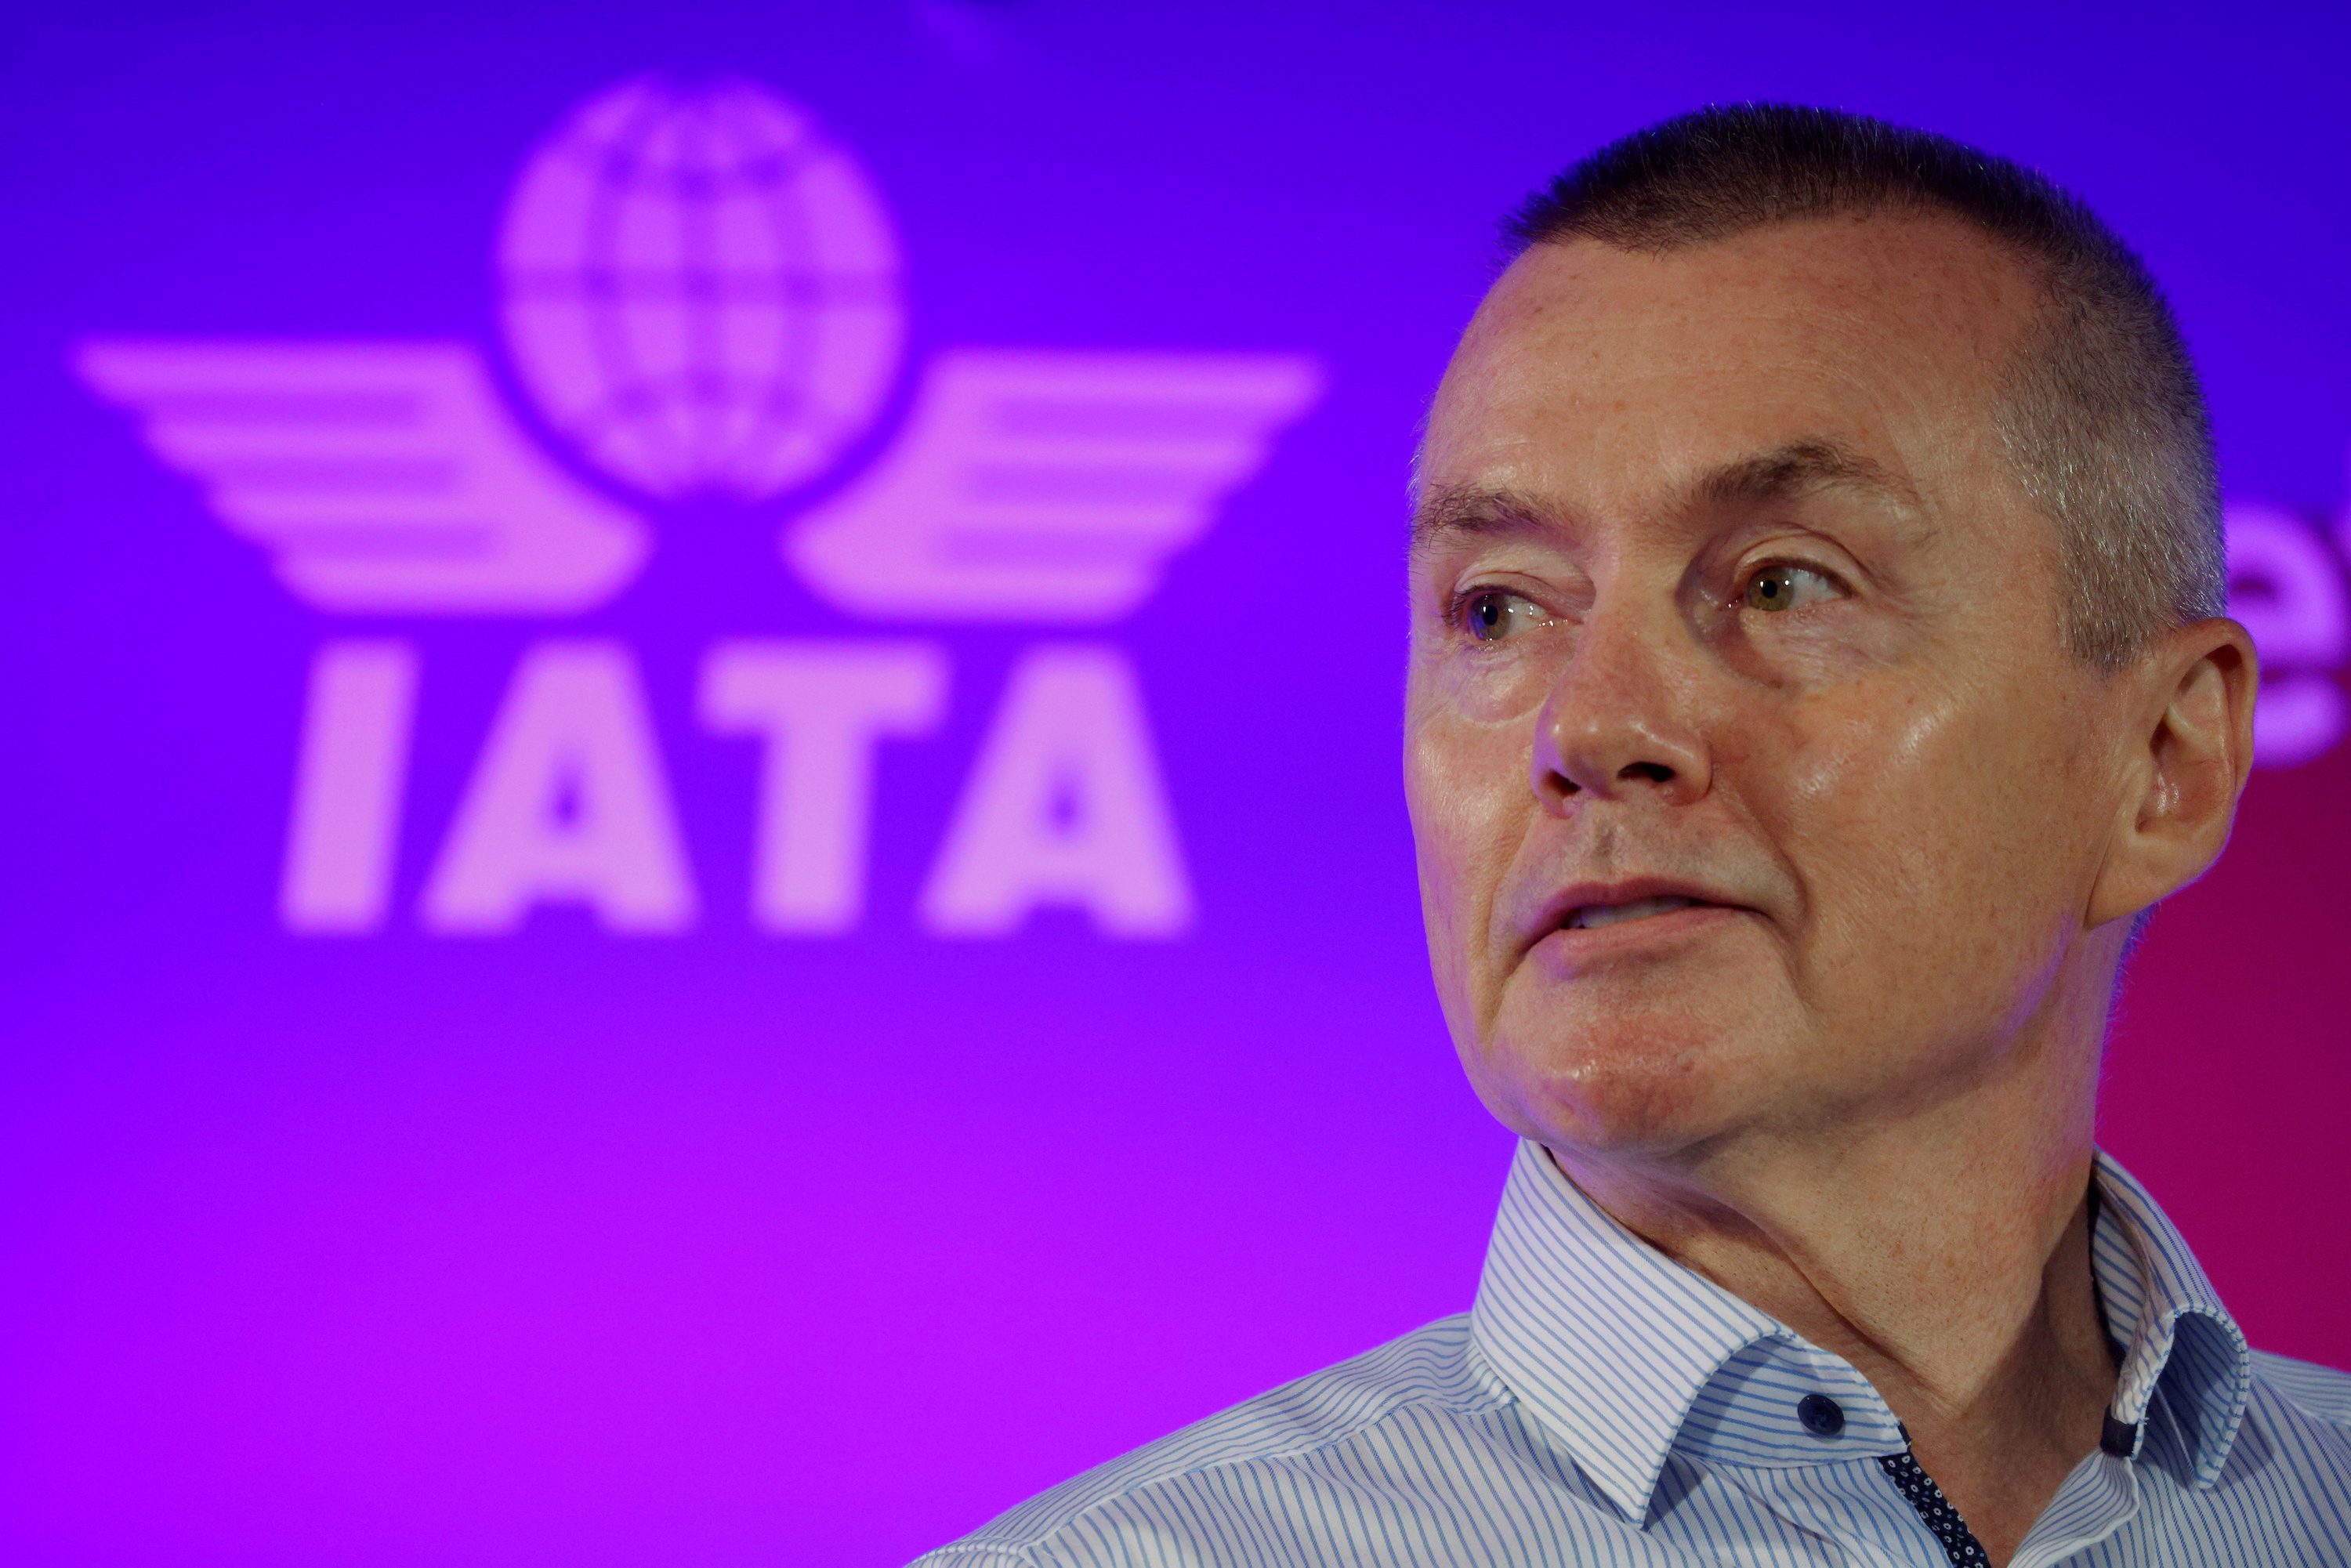 Airlines chief says high oil prices to delay debt reduction